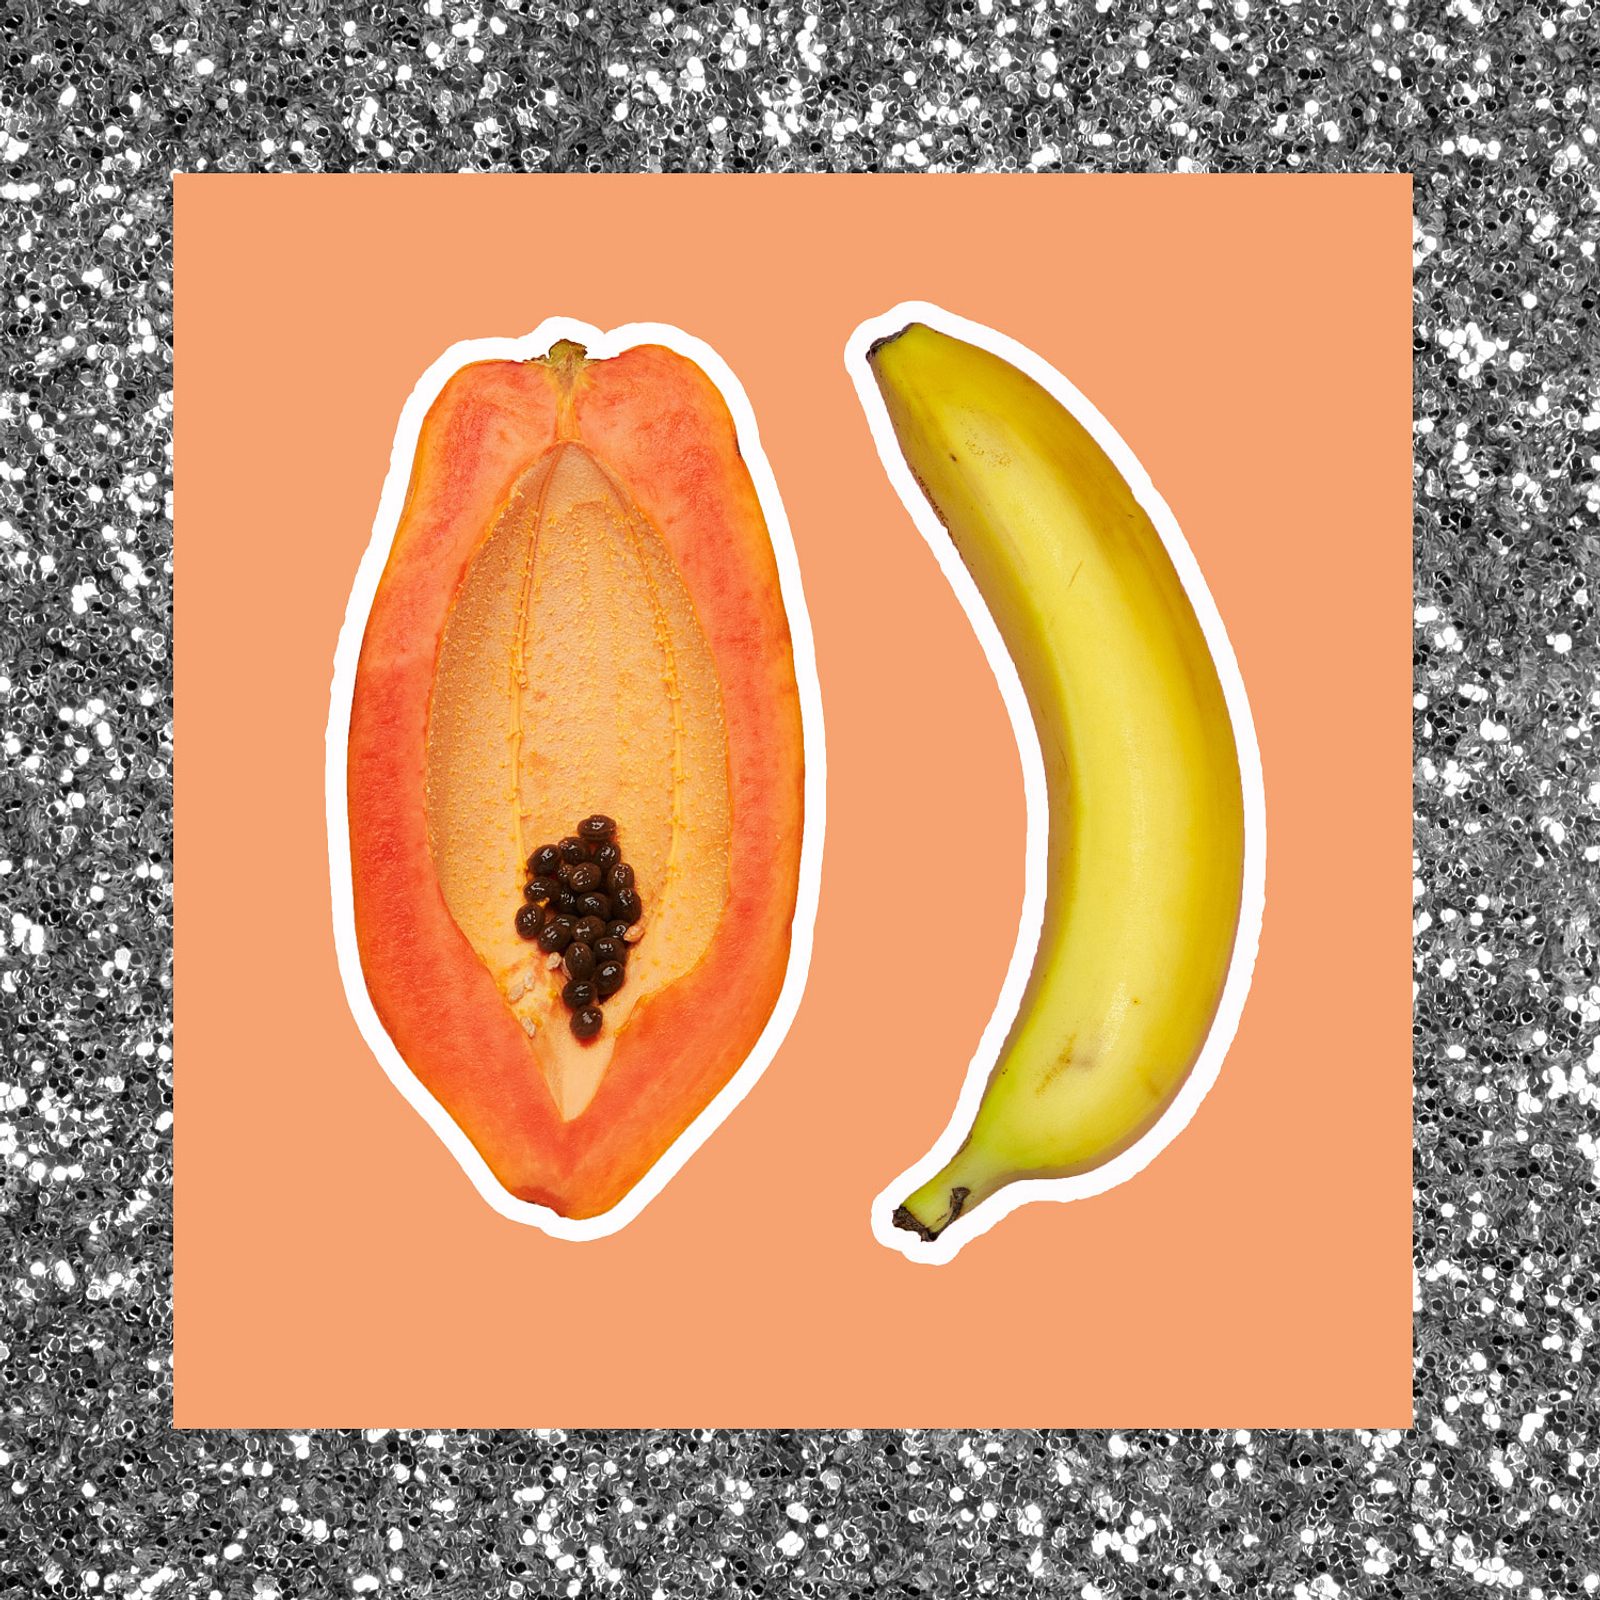 daniela cadavid recommends sex with fruit tumblr pic